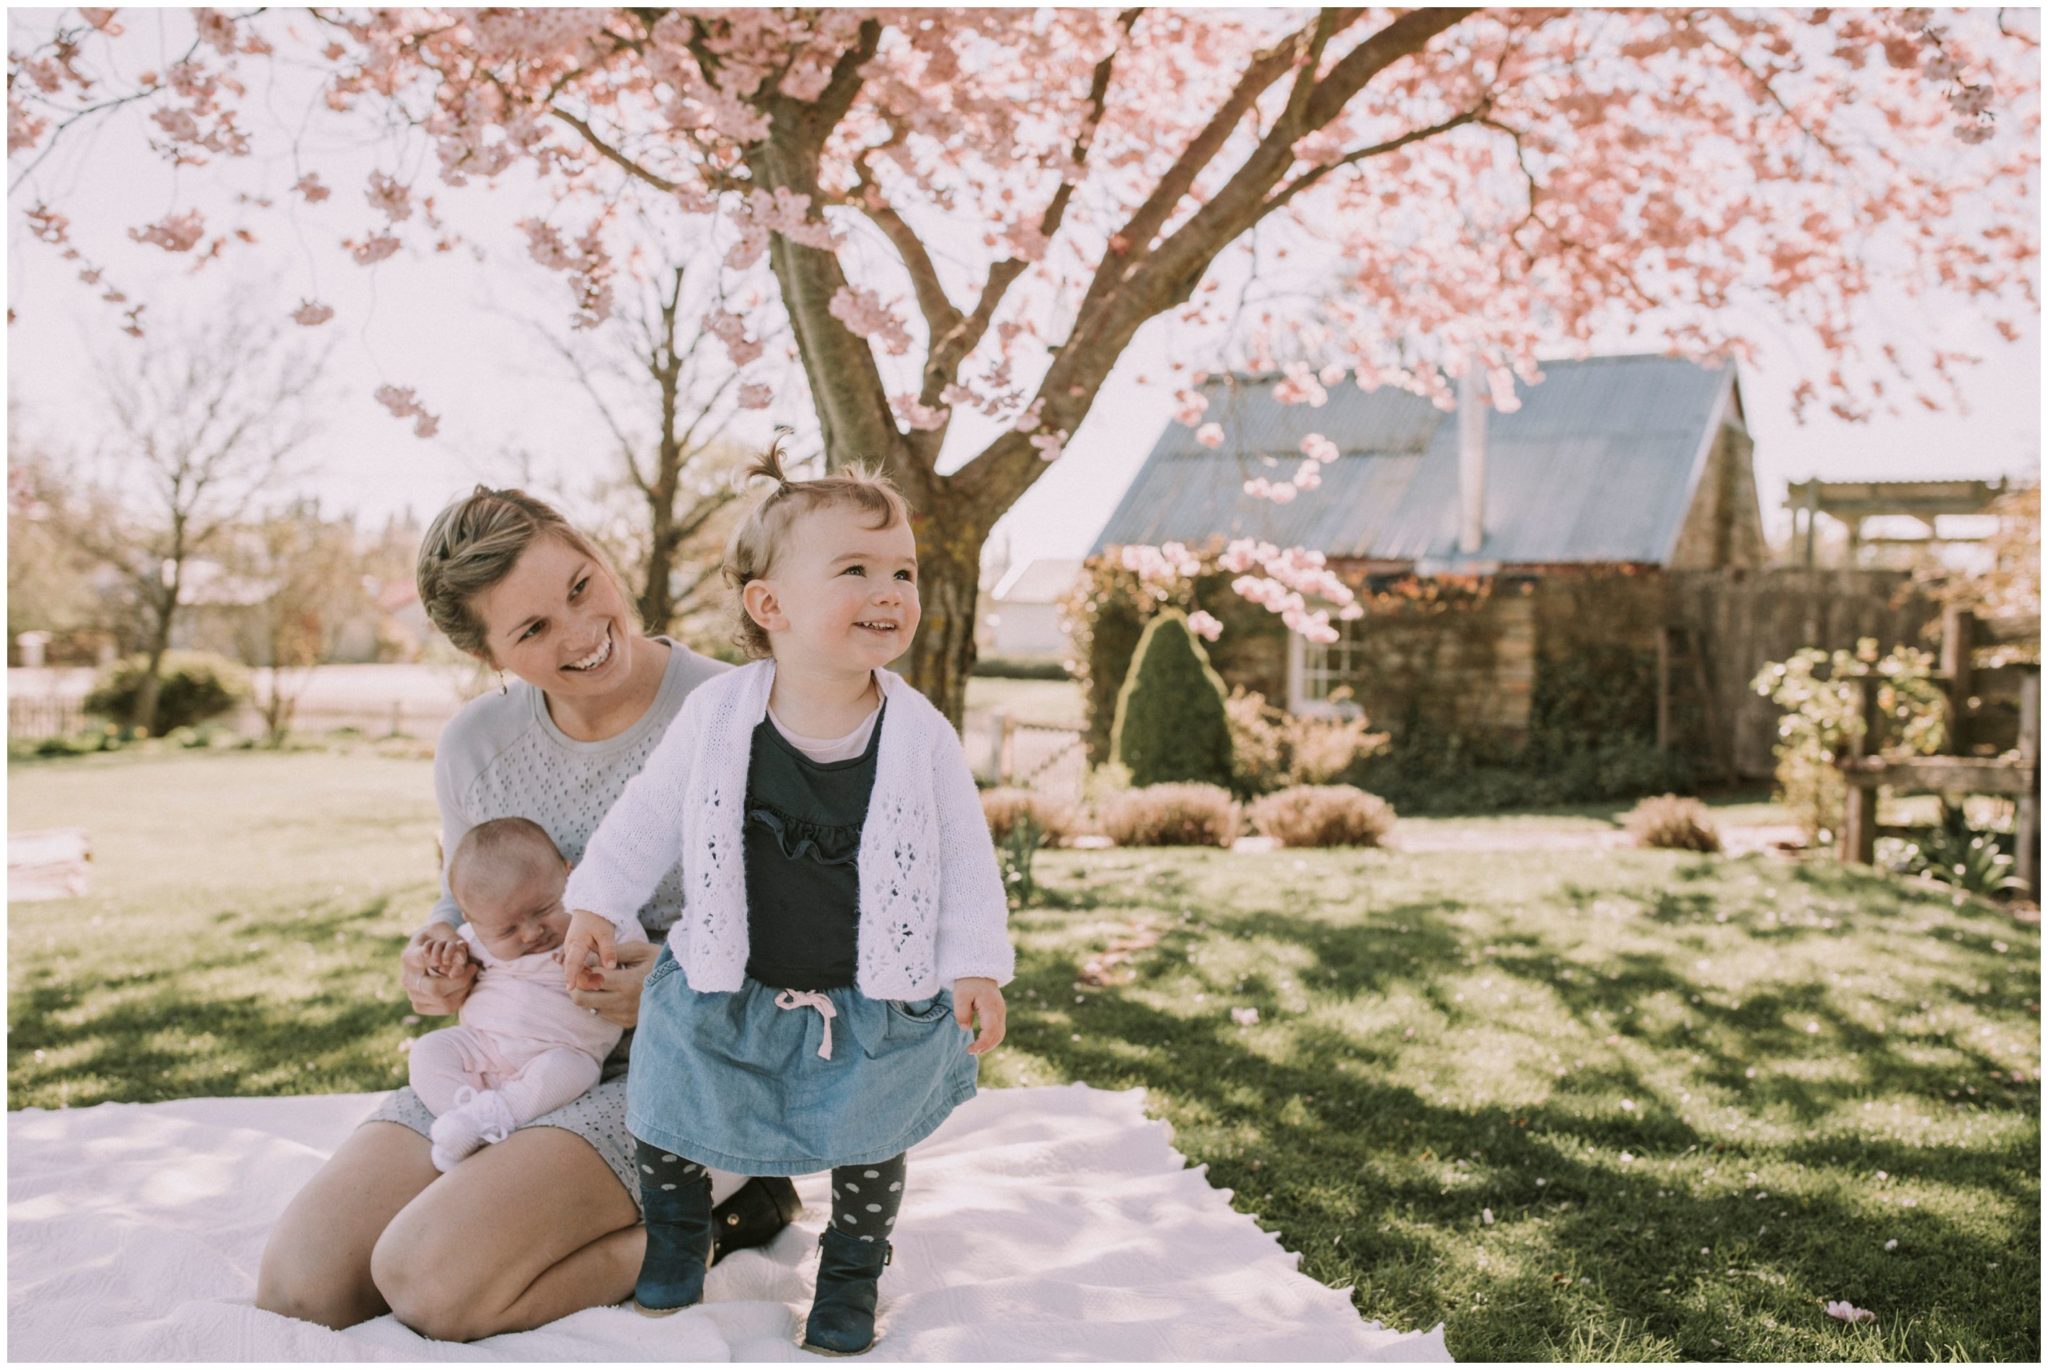 Charlotte Kiri Photography - Family Photography of a newborn baby girl being held on her mothers lap on a picnic blanket, while her toddler sister stands in front of them smiling, with a pink blossom tree and pretty cottage behind in Wanaka, New Zealand.